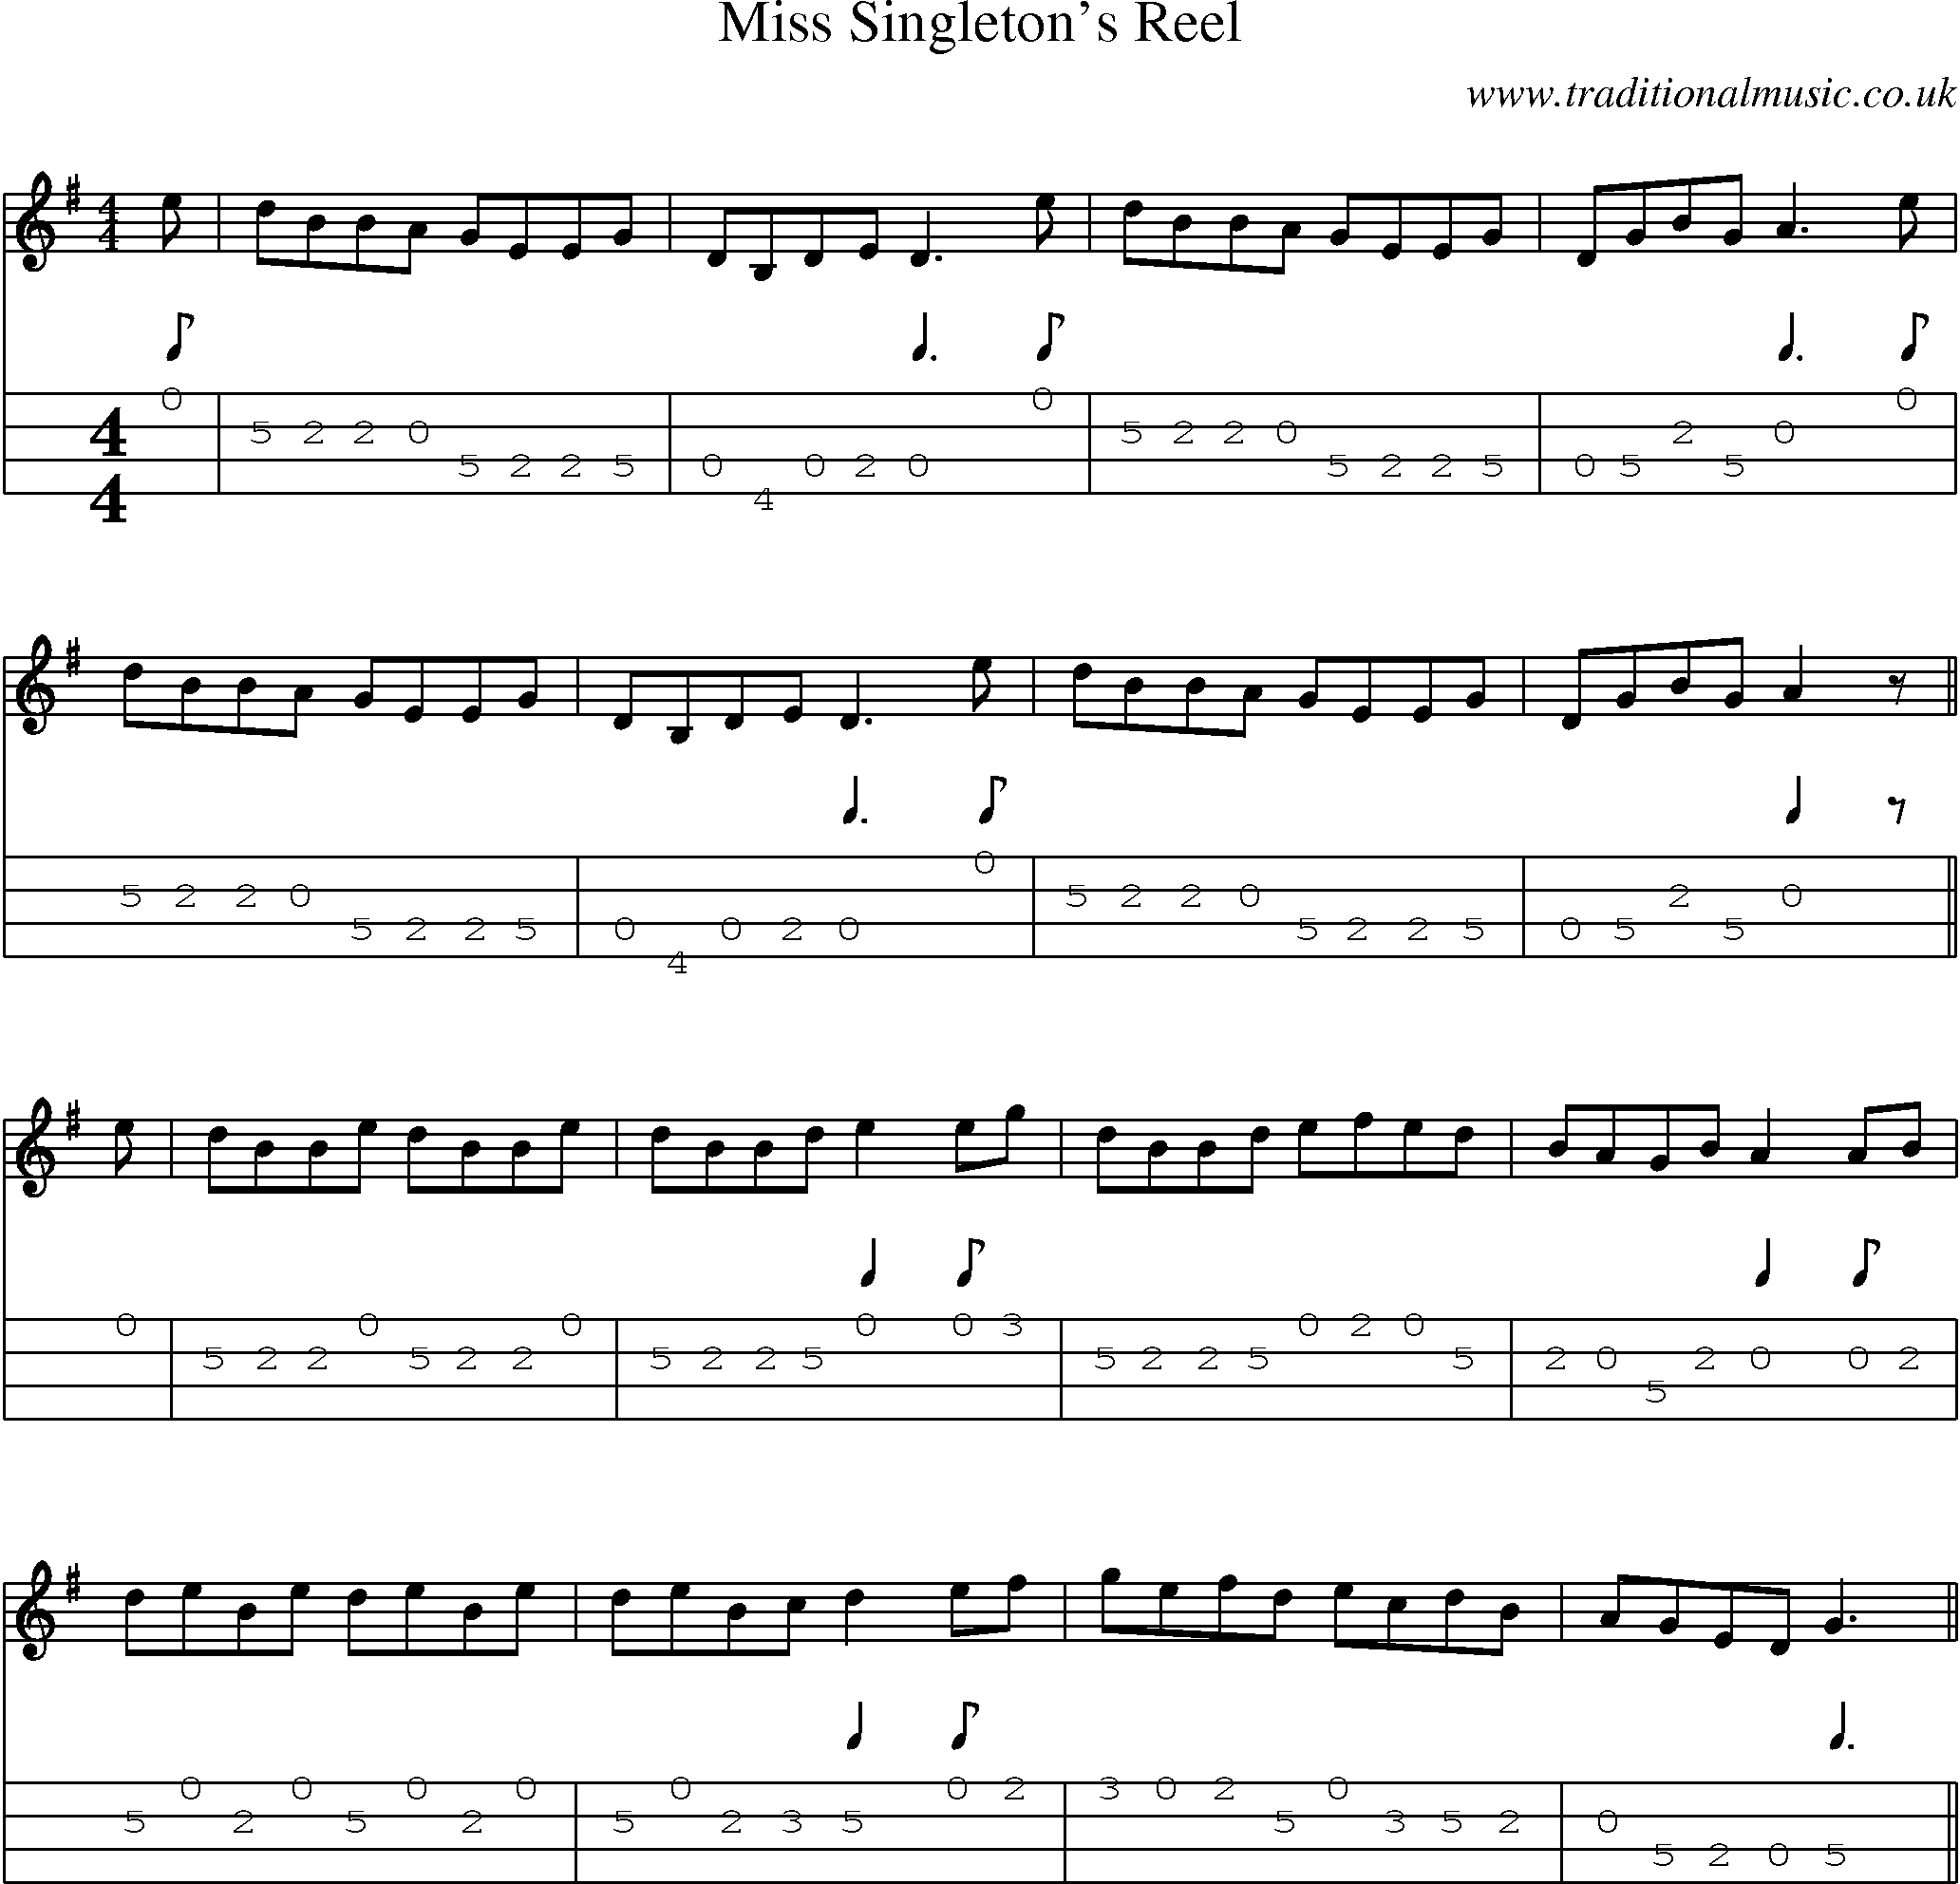 Music Score and Mandolin Tabs for Miss Singletons Reel